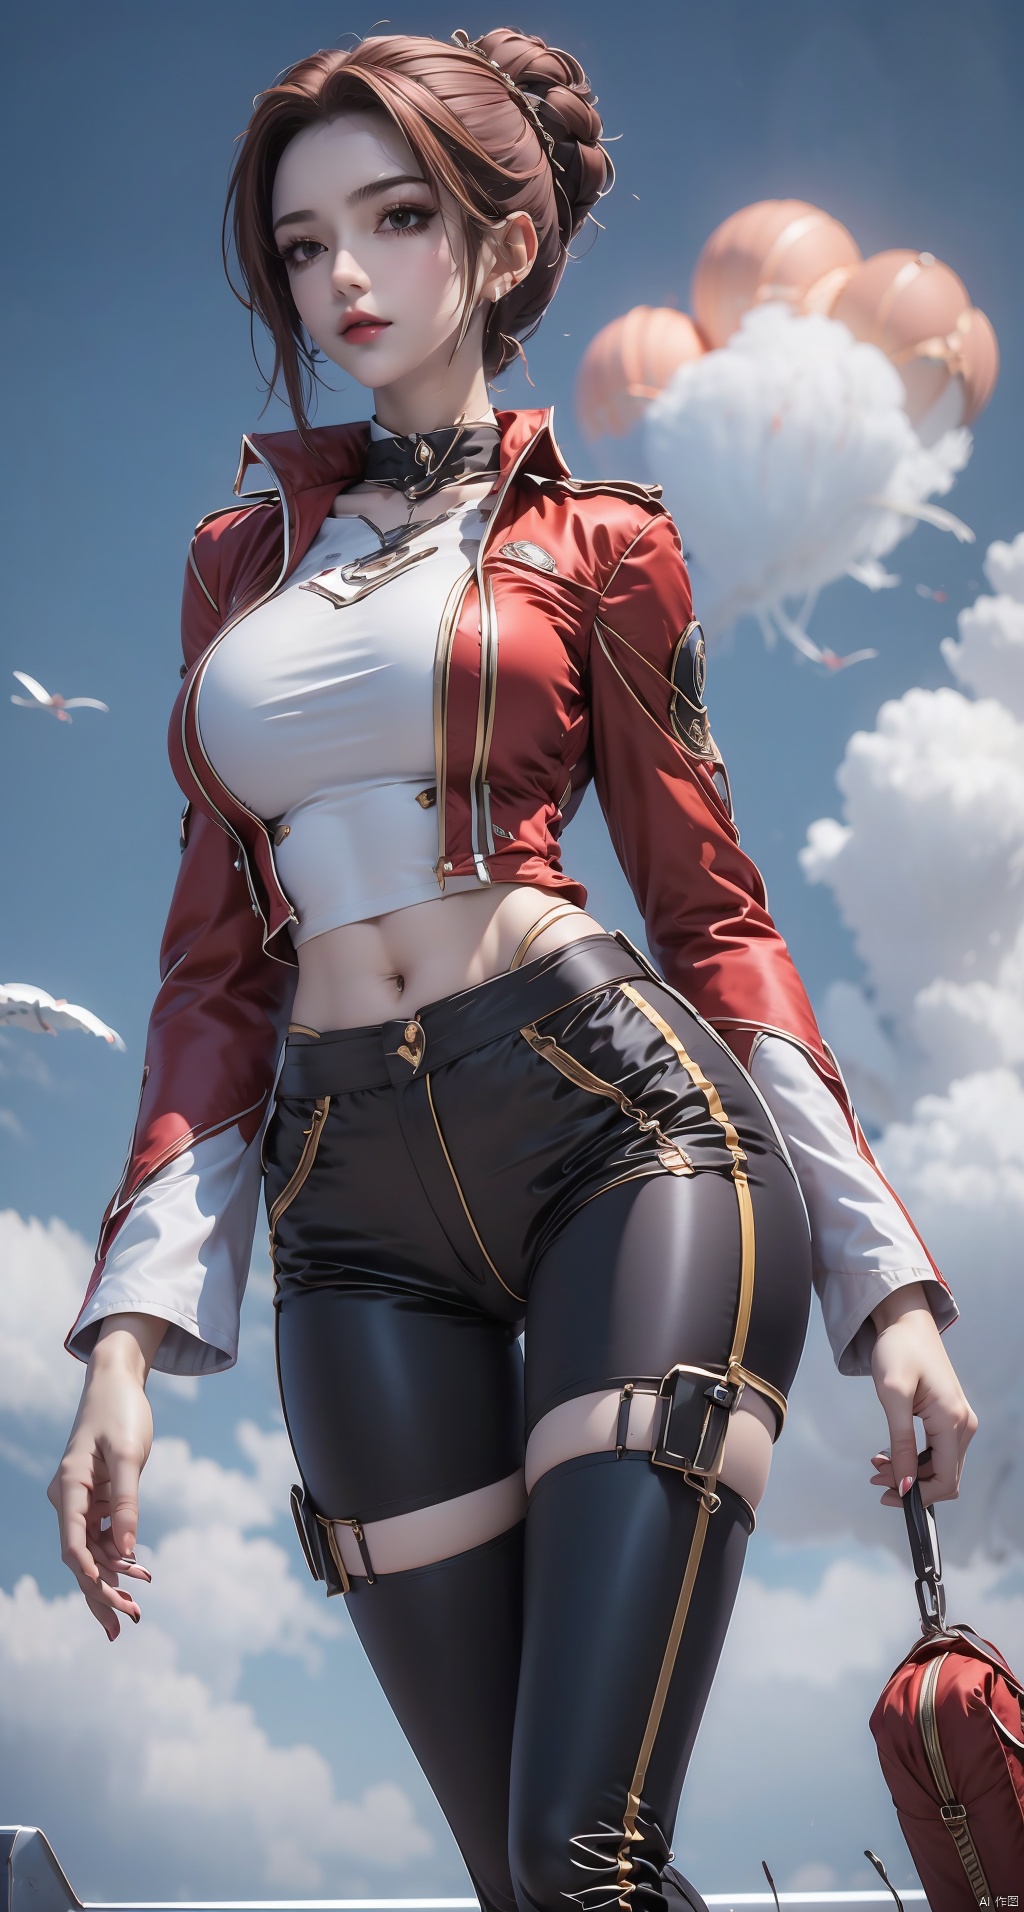  1 girl,In the sky,Tight pants,Parachute,jacket sky,thigh holster,thigh strap,